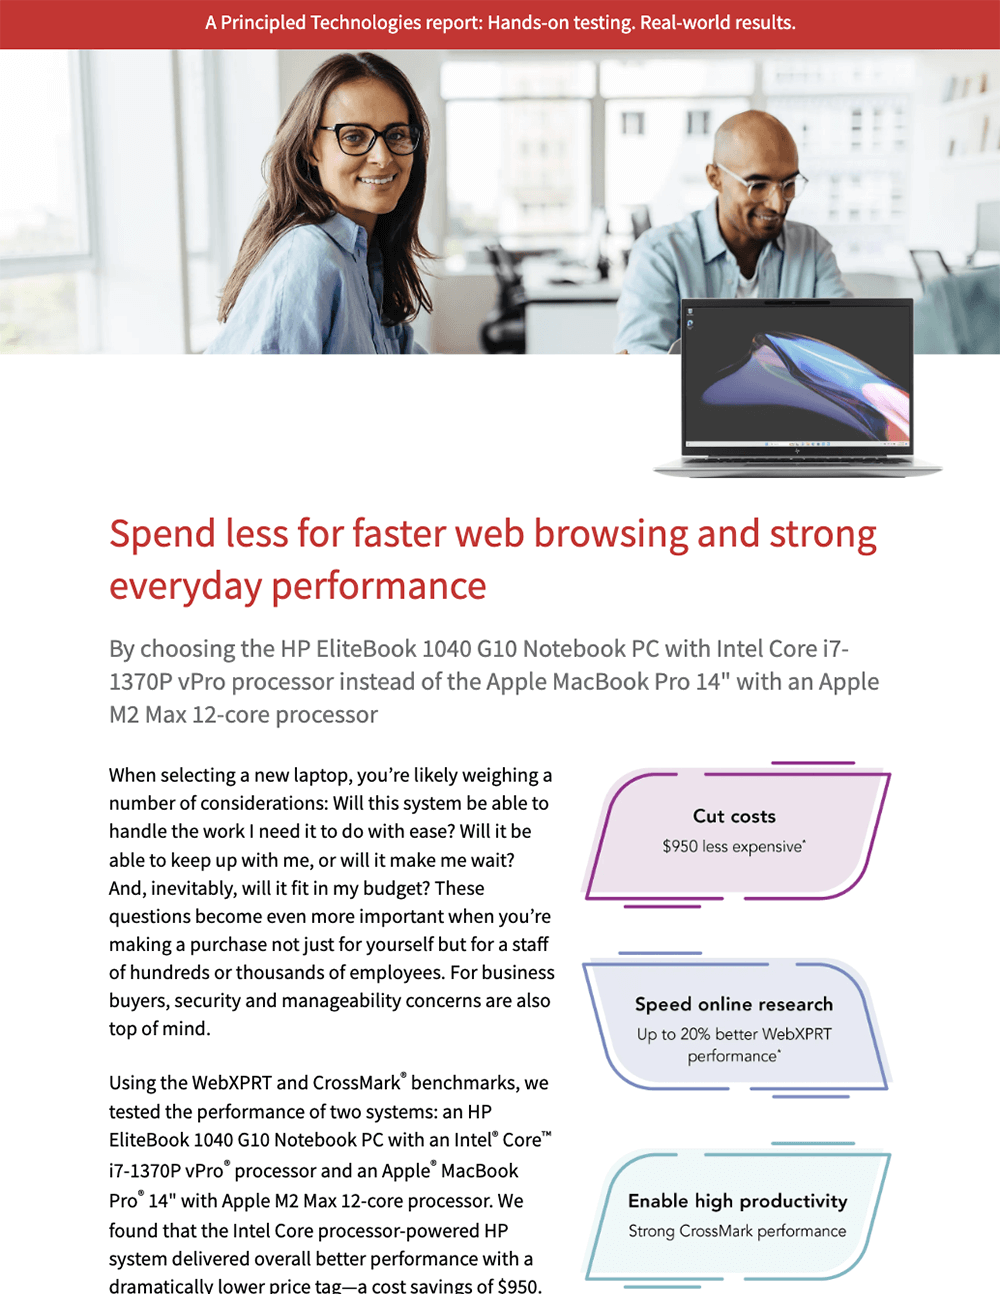 Spend less for faster web browsing and strong everyday performance